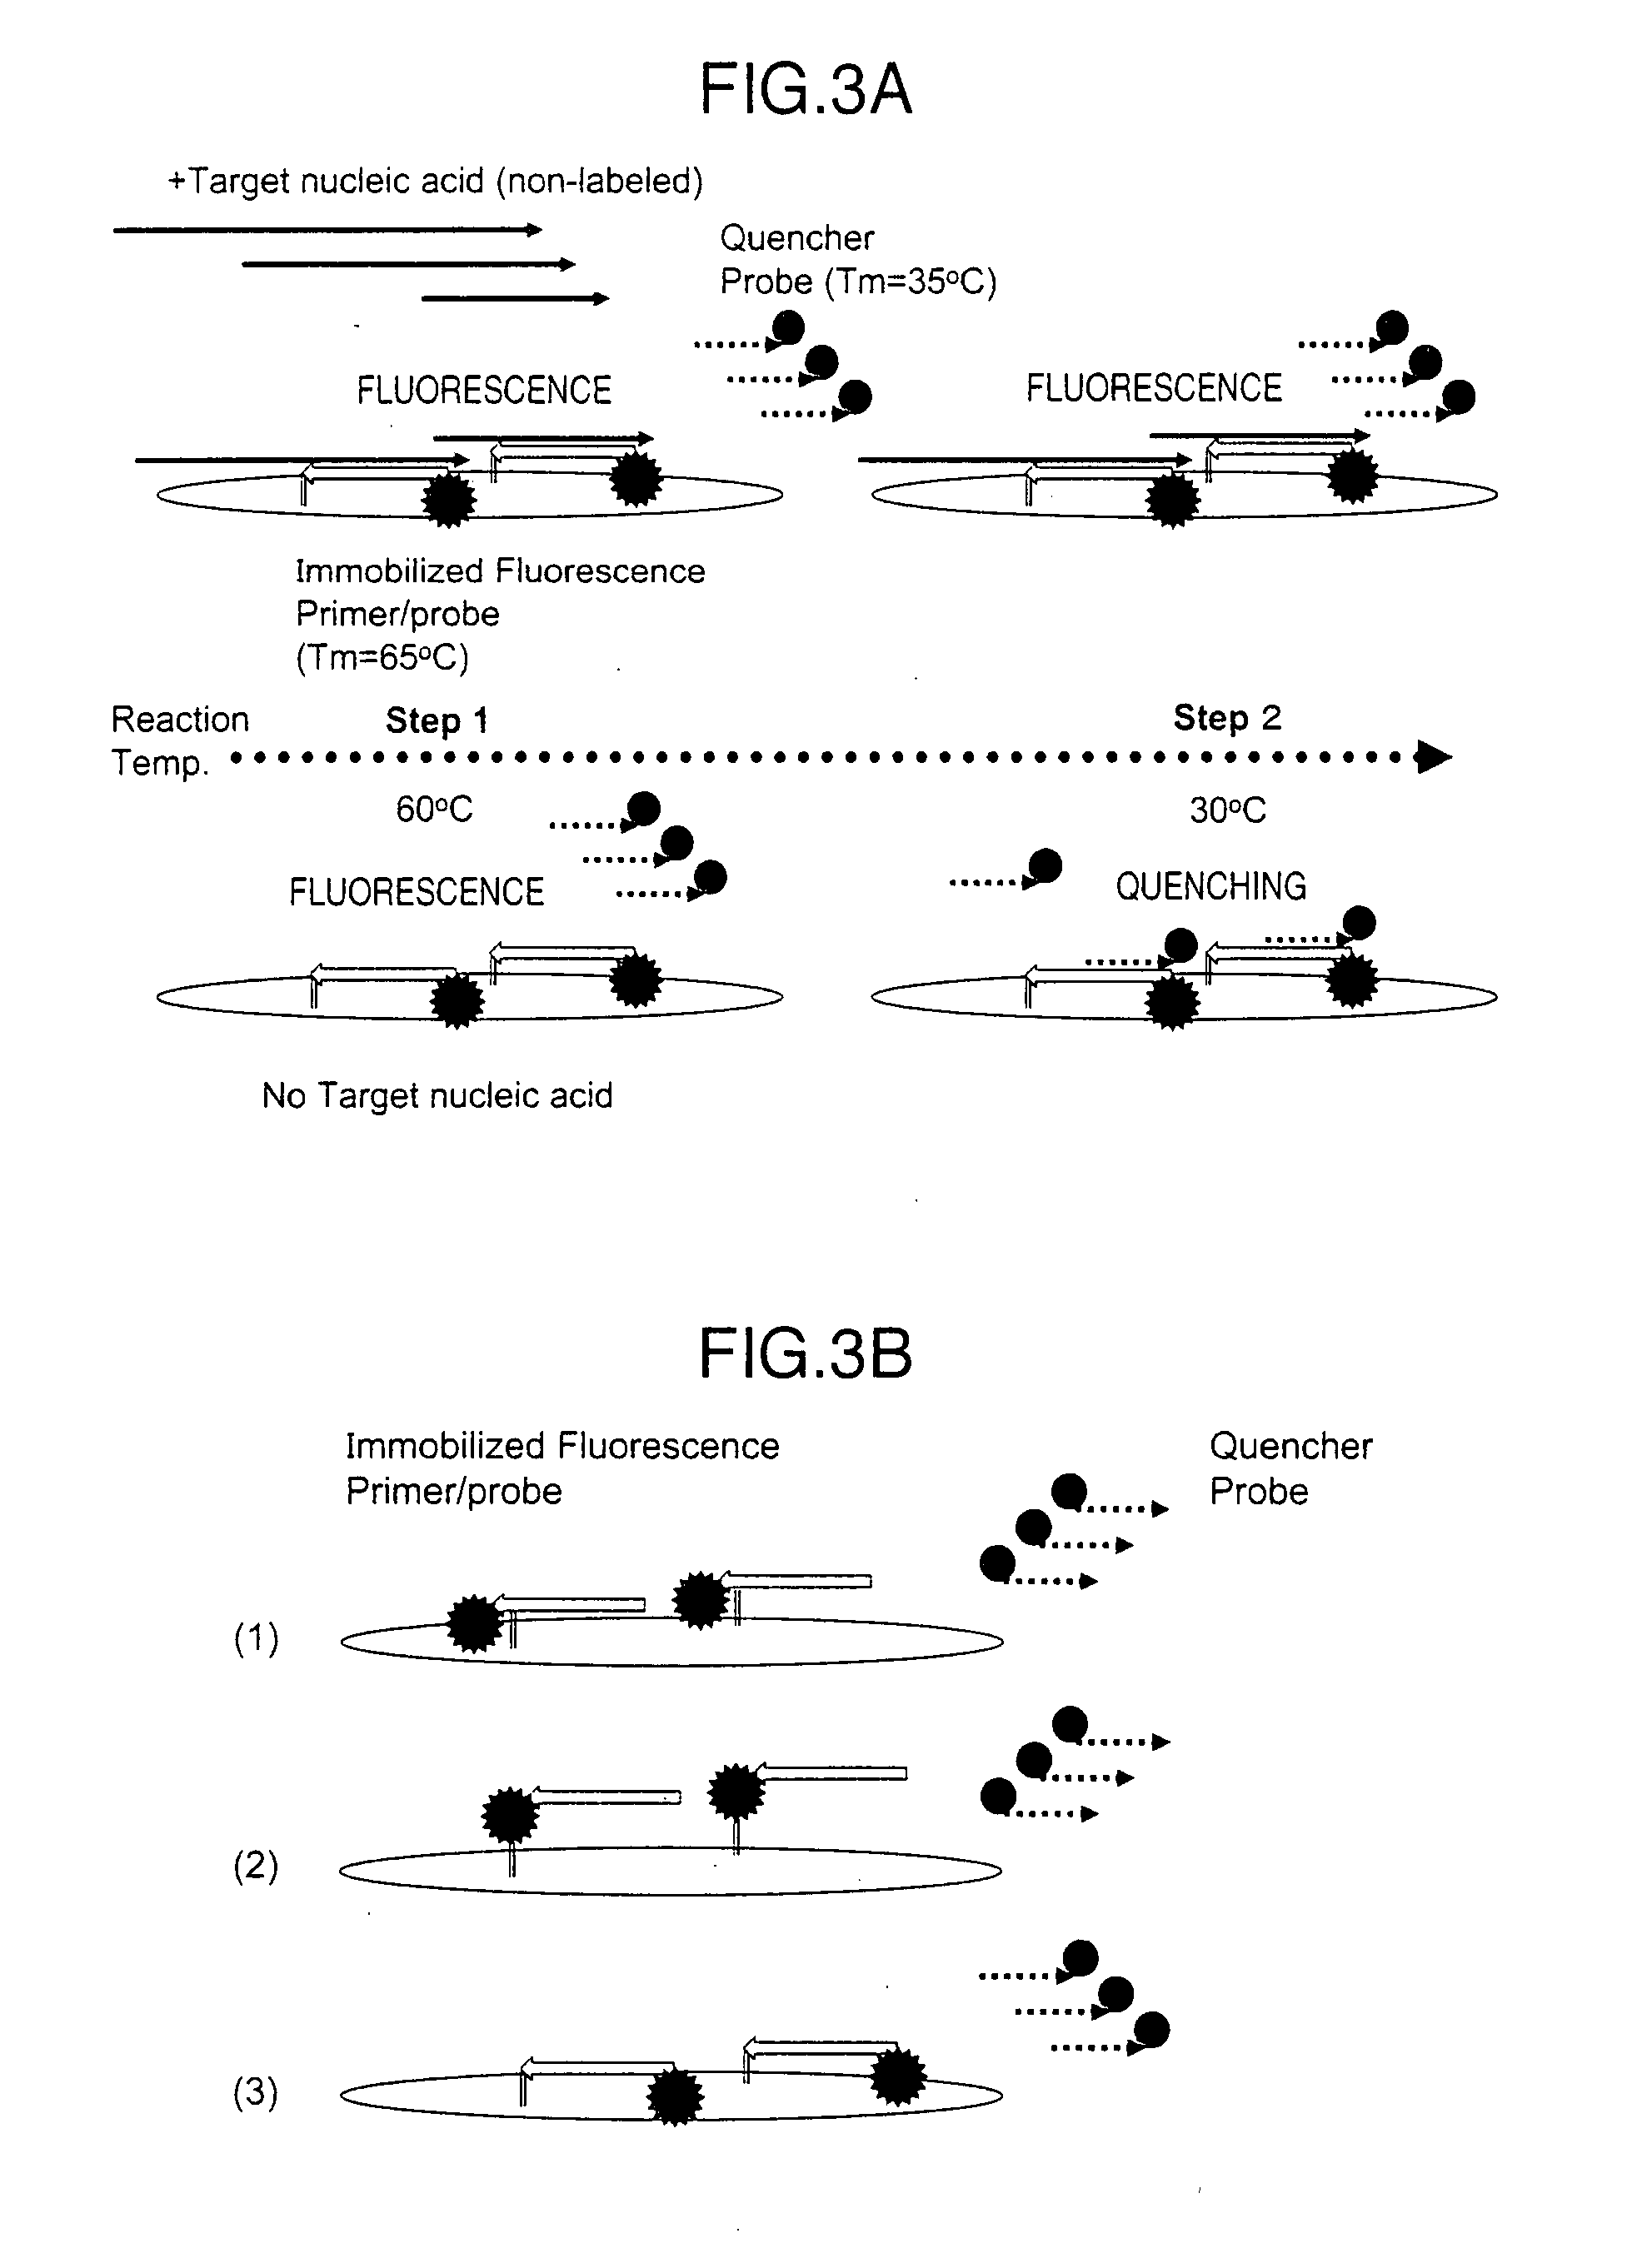 Method for detecting target nucleic acid